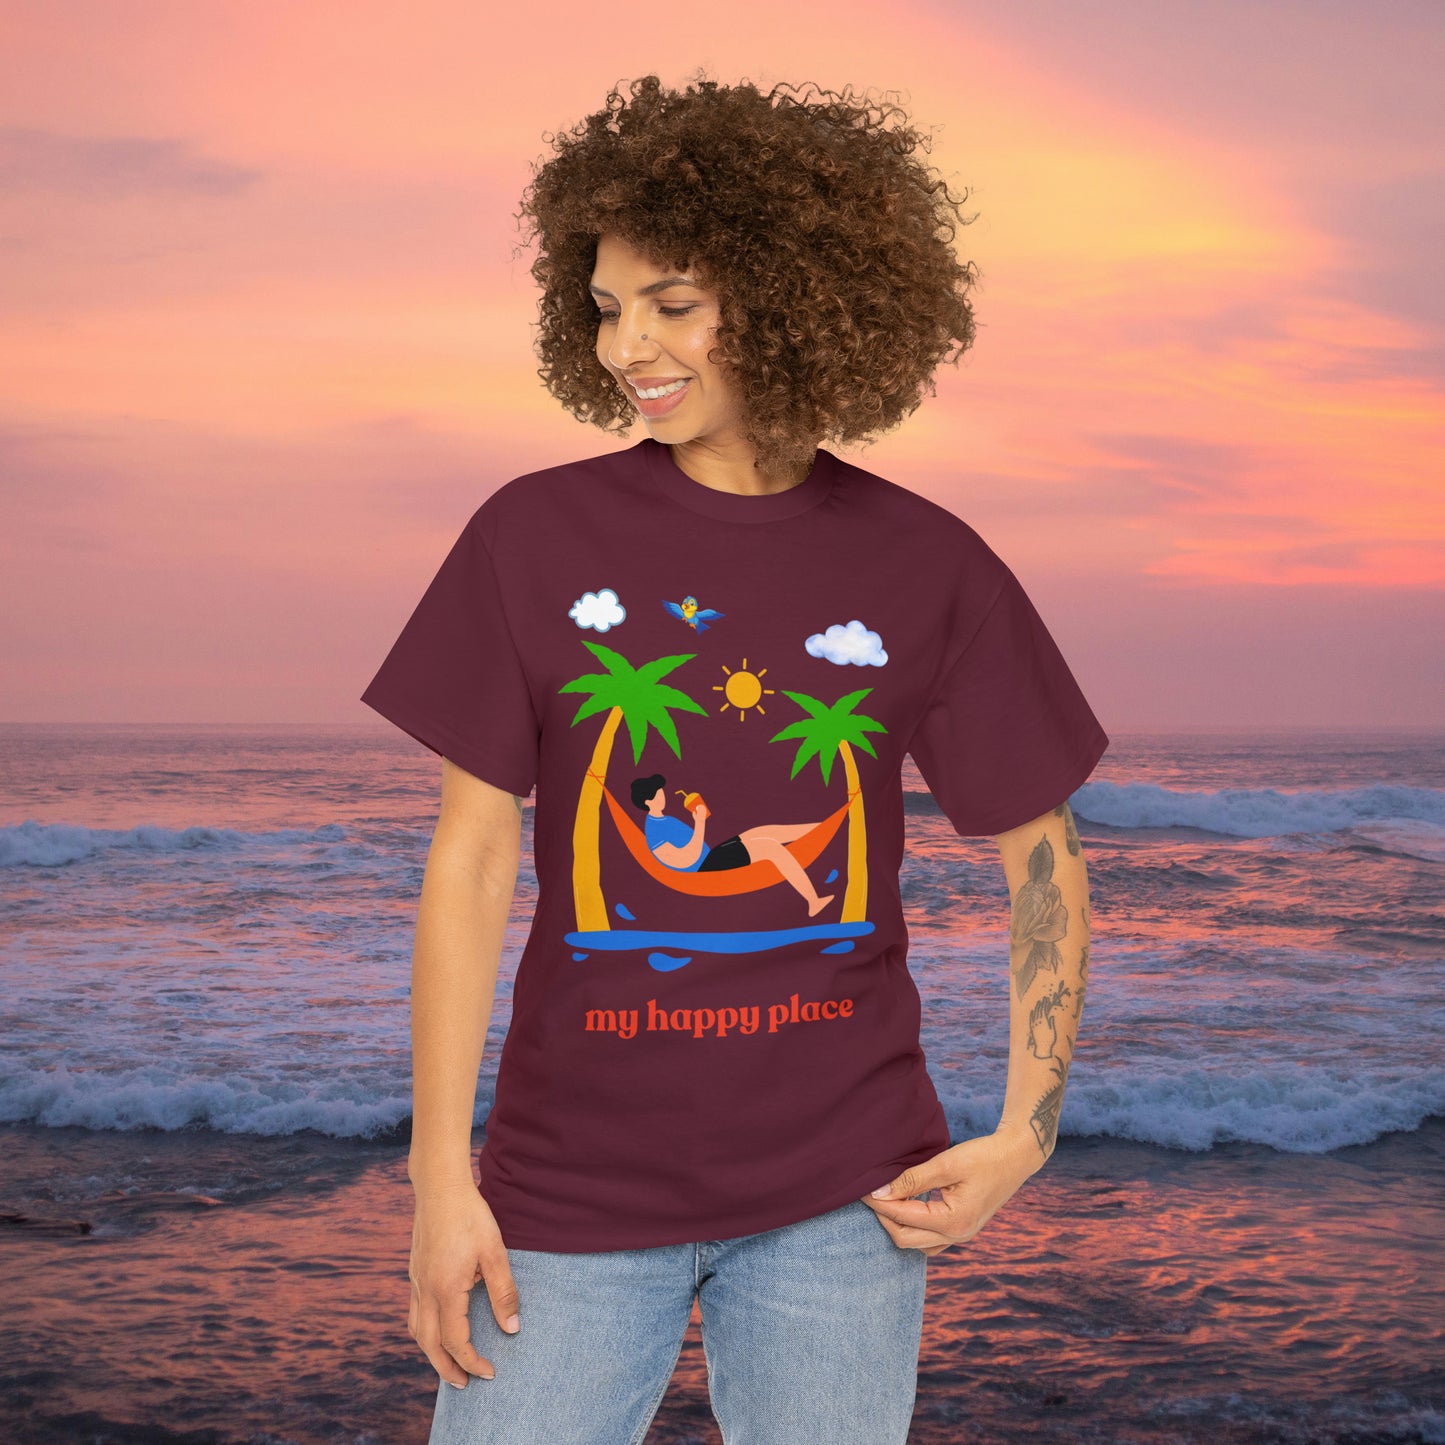 Is the beach your happy place? This is the shirt for you if it is. This Unisex Heavy Cotton Tee makes for a great gift or get one to enjoy yourself.